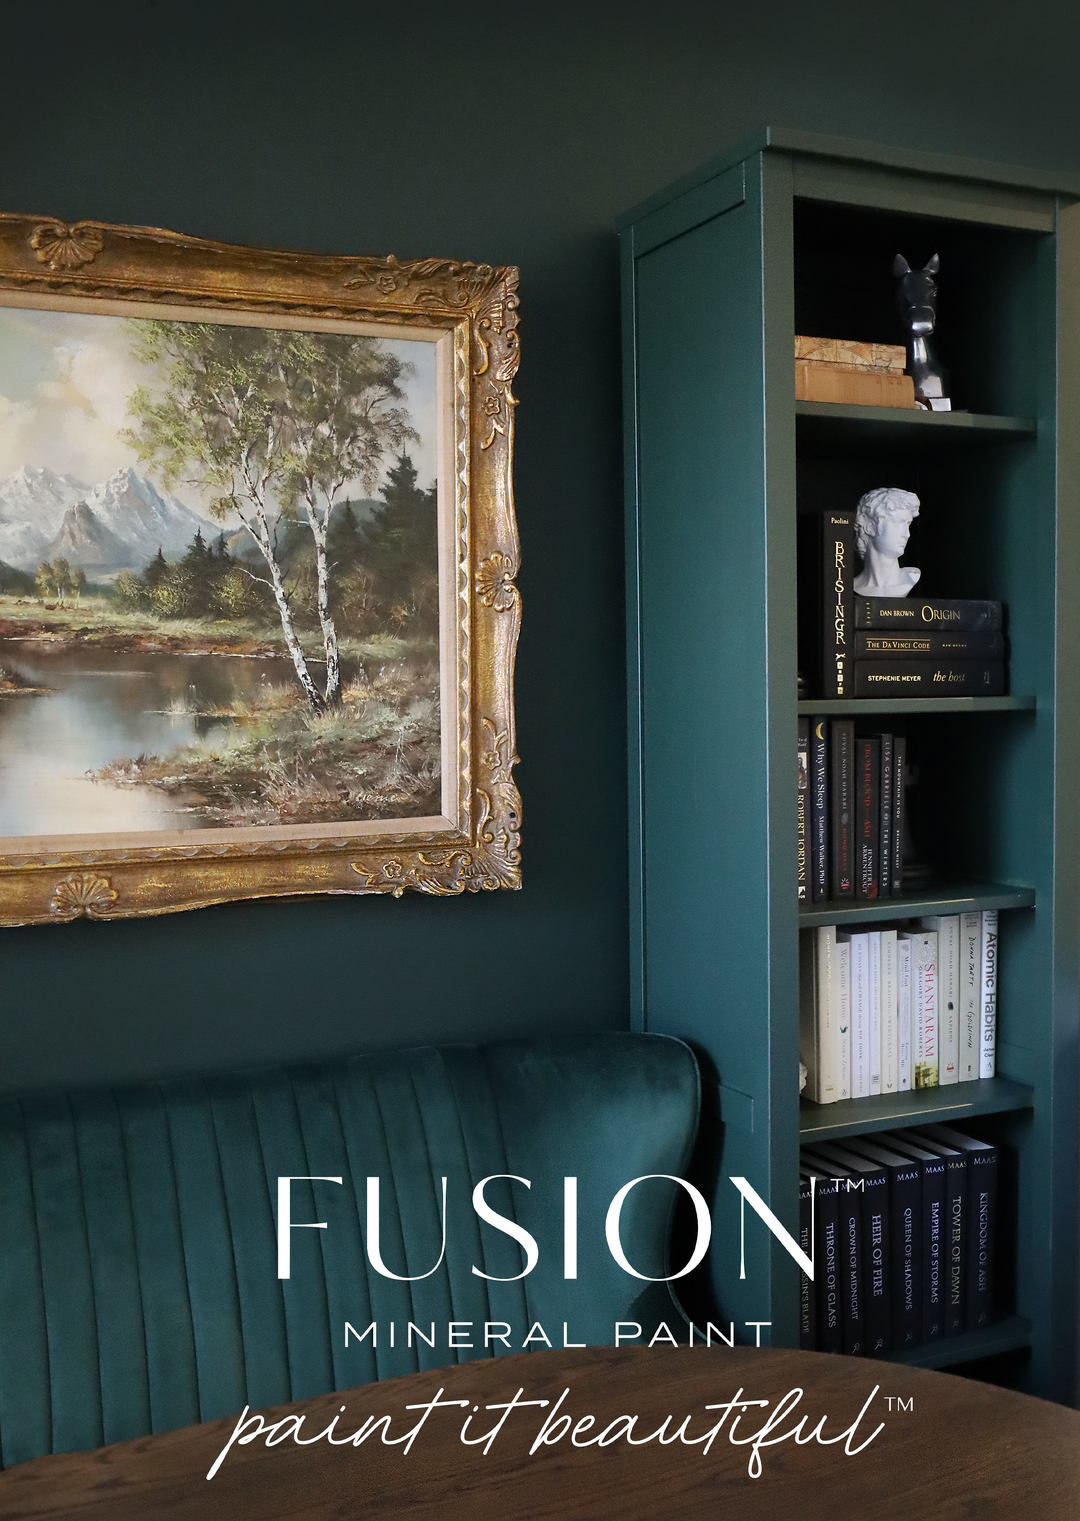 NEW! MANOR GREEN Fusion™ Mineral Paint - Rustic Farmhouse Charm